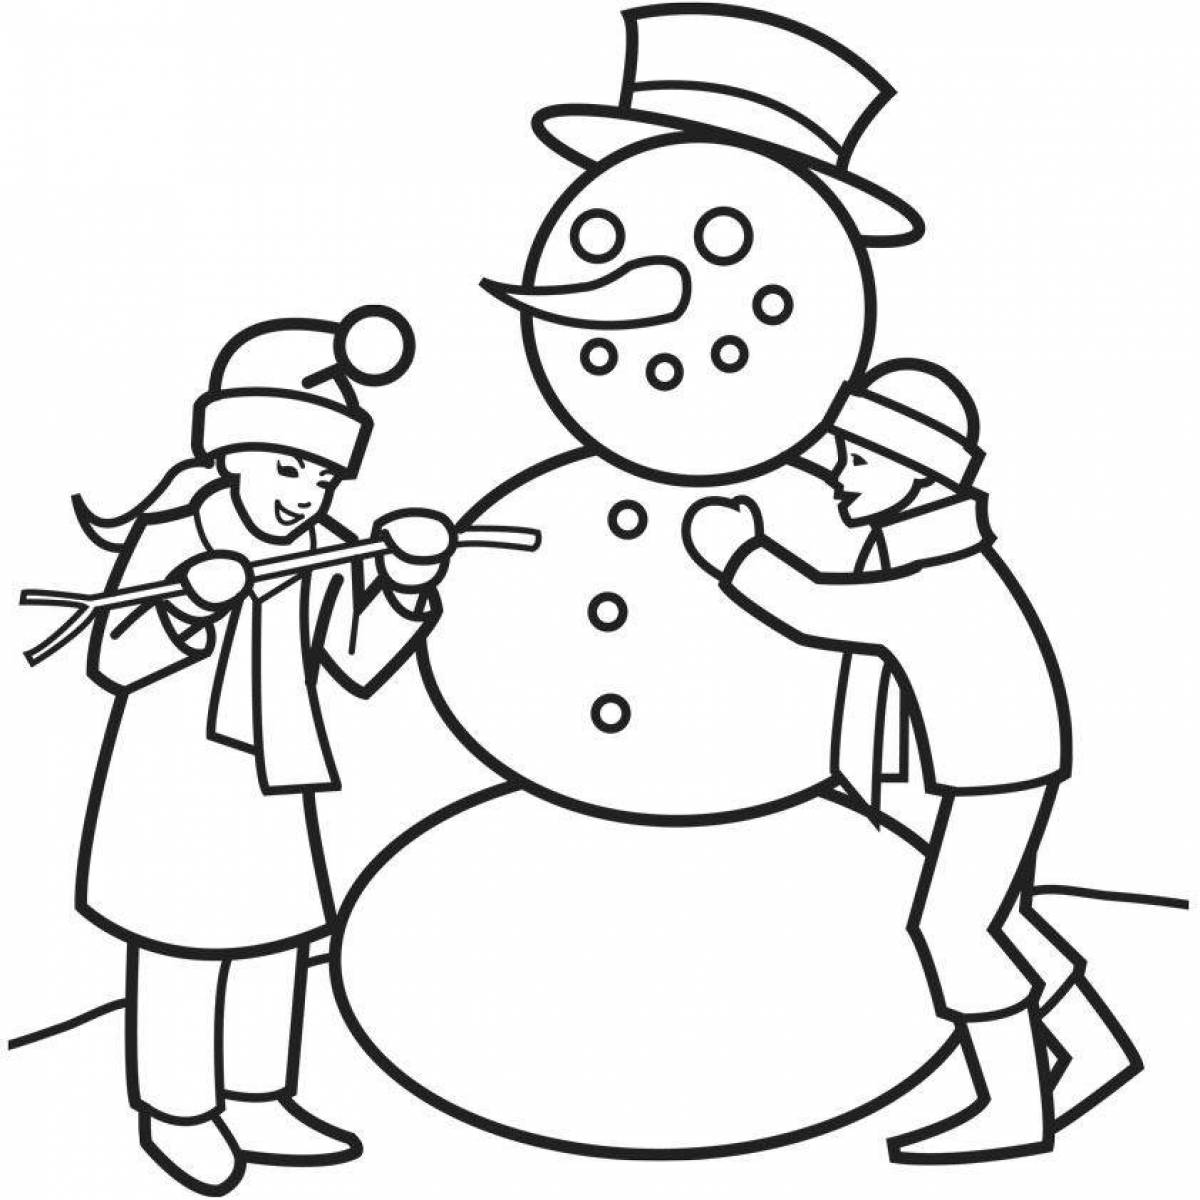 Color-frenzy coloring page children make a snowman